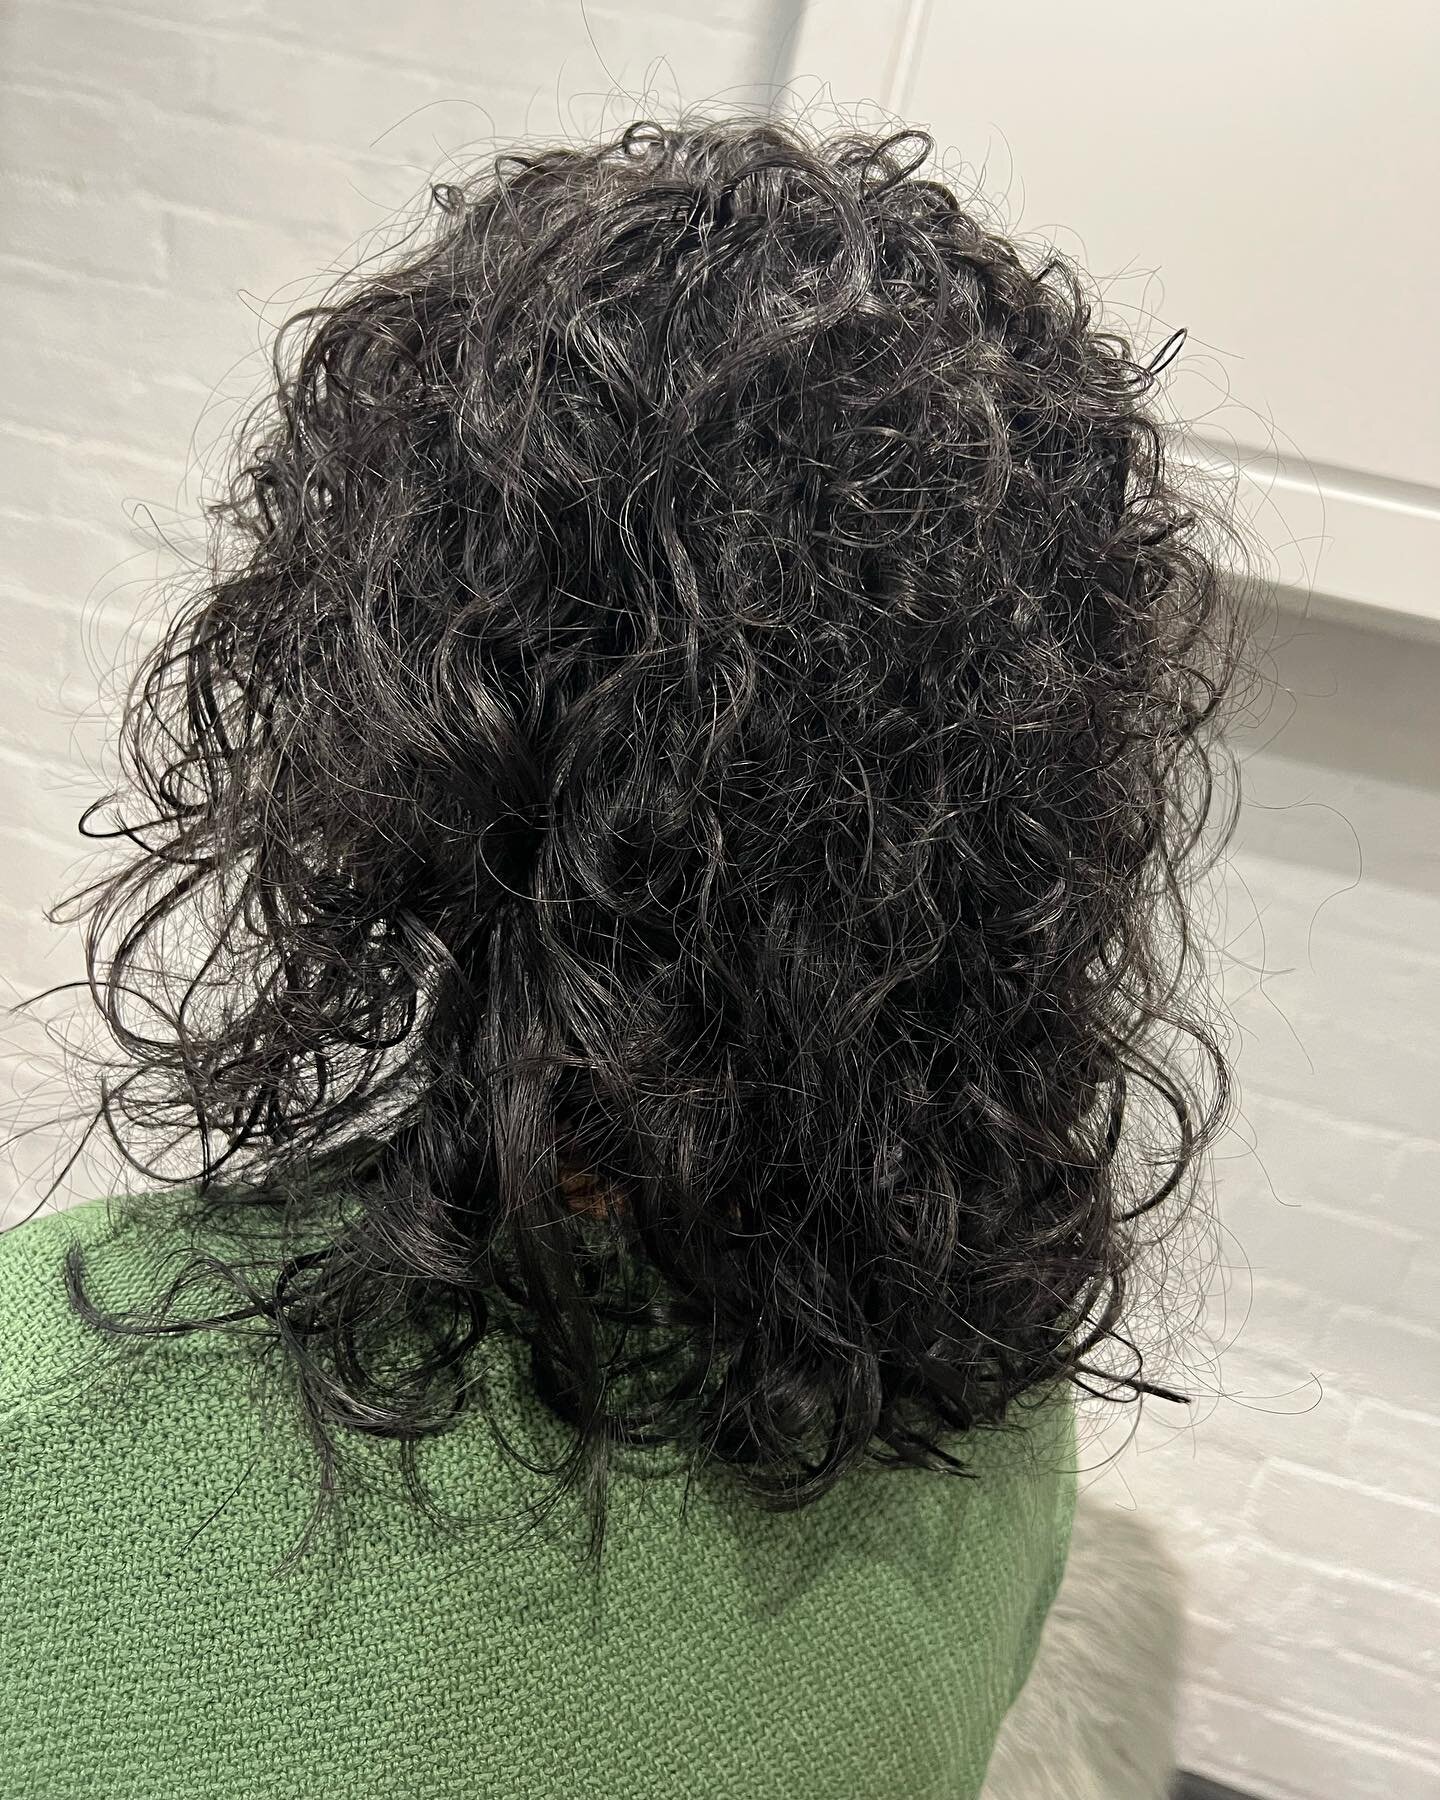 Before &amp; after 🤩 perm by Belinda